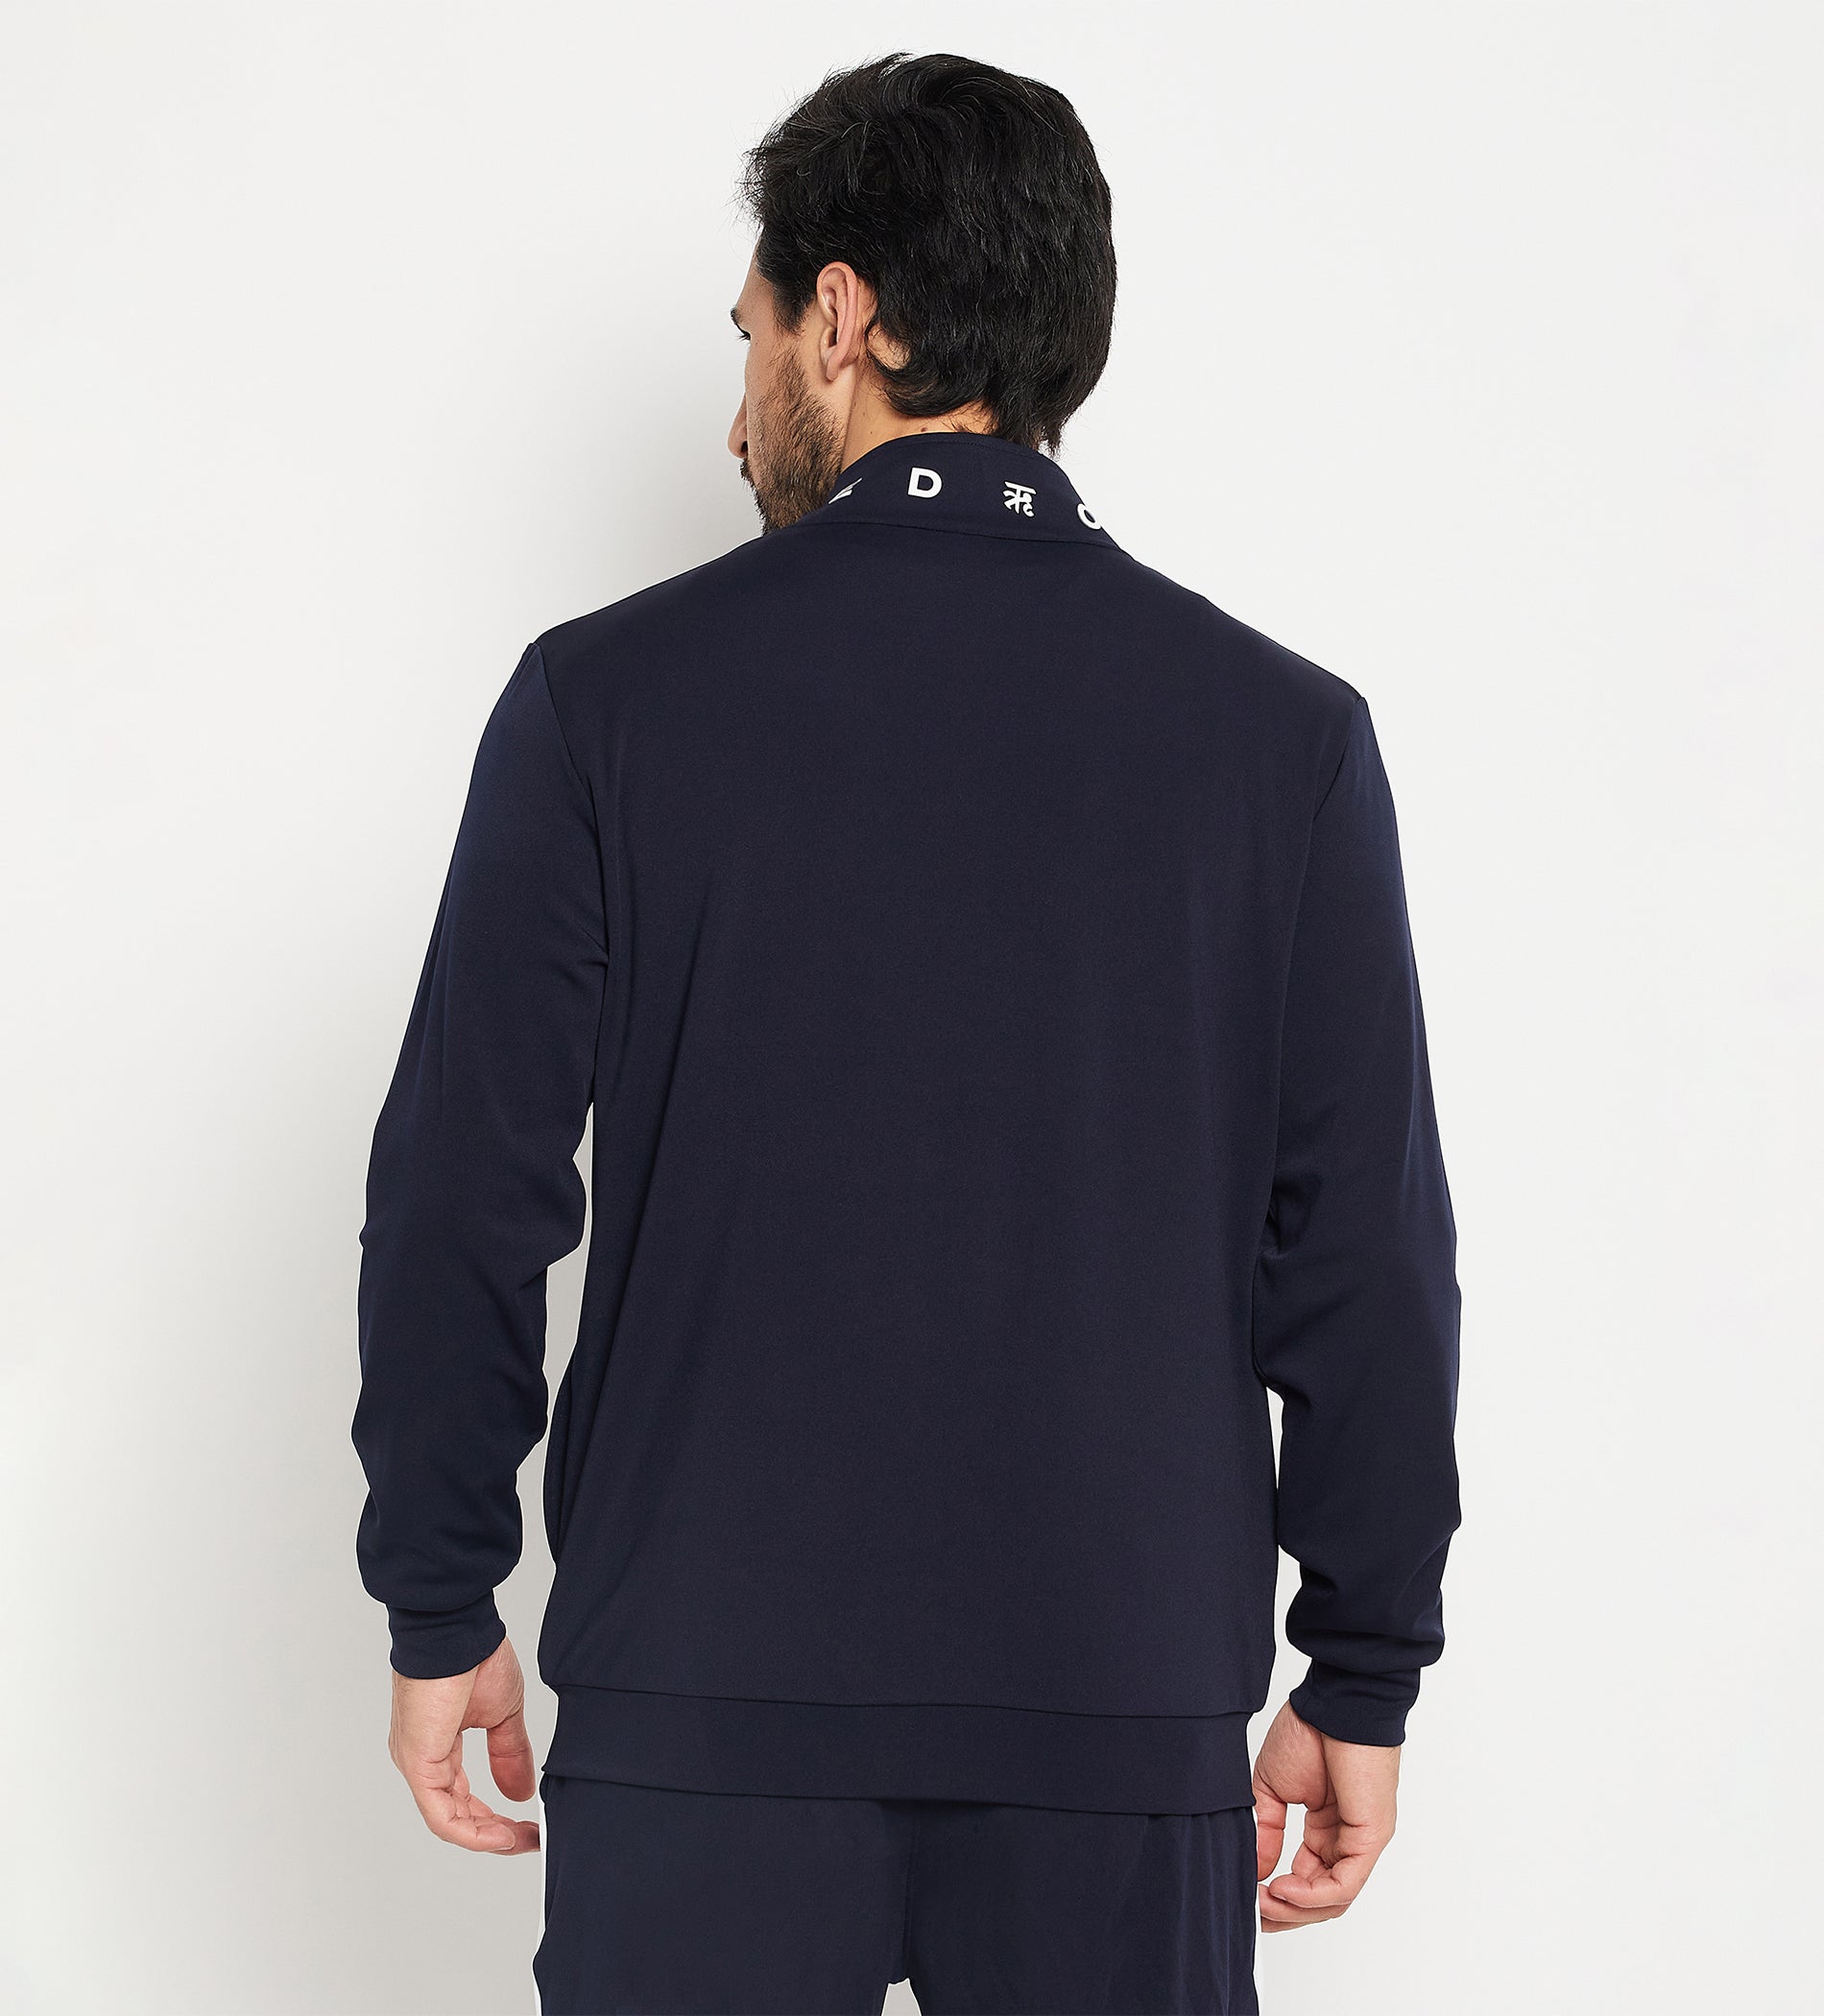 Navy Full Sleeve Zipper Jacket With Print And Contrast Color